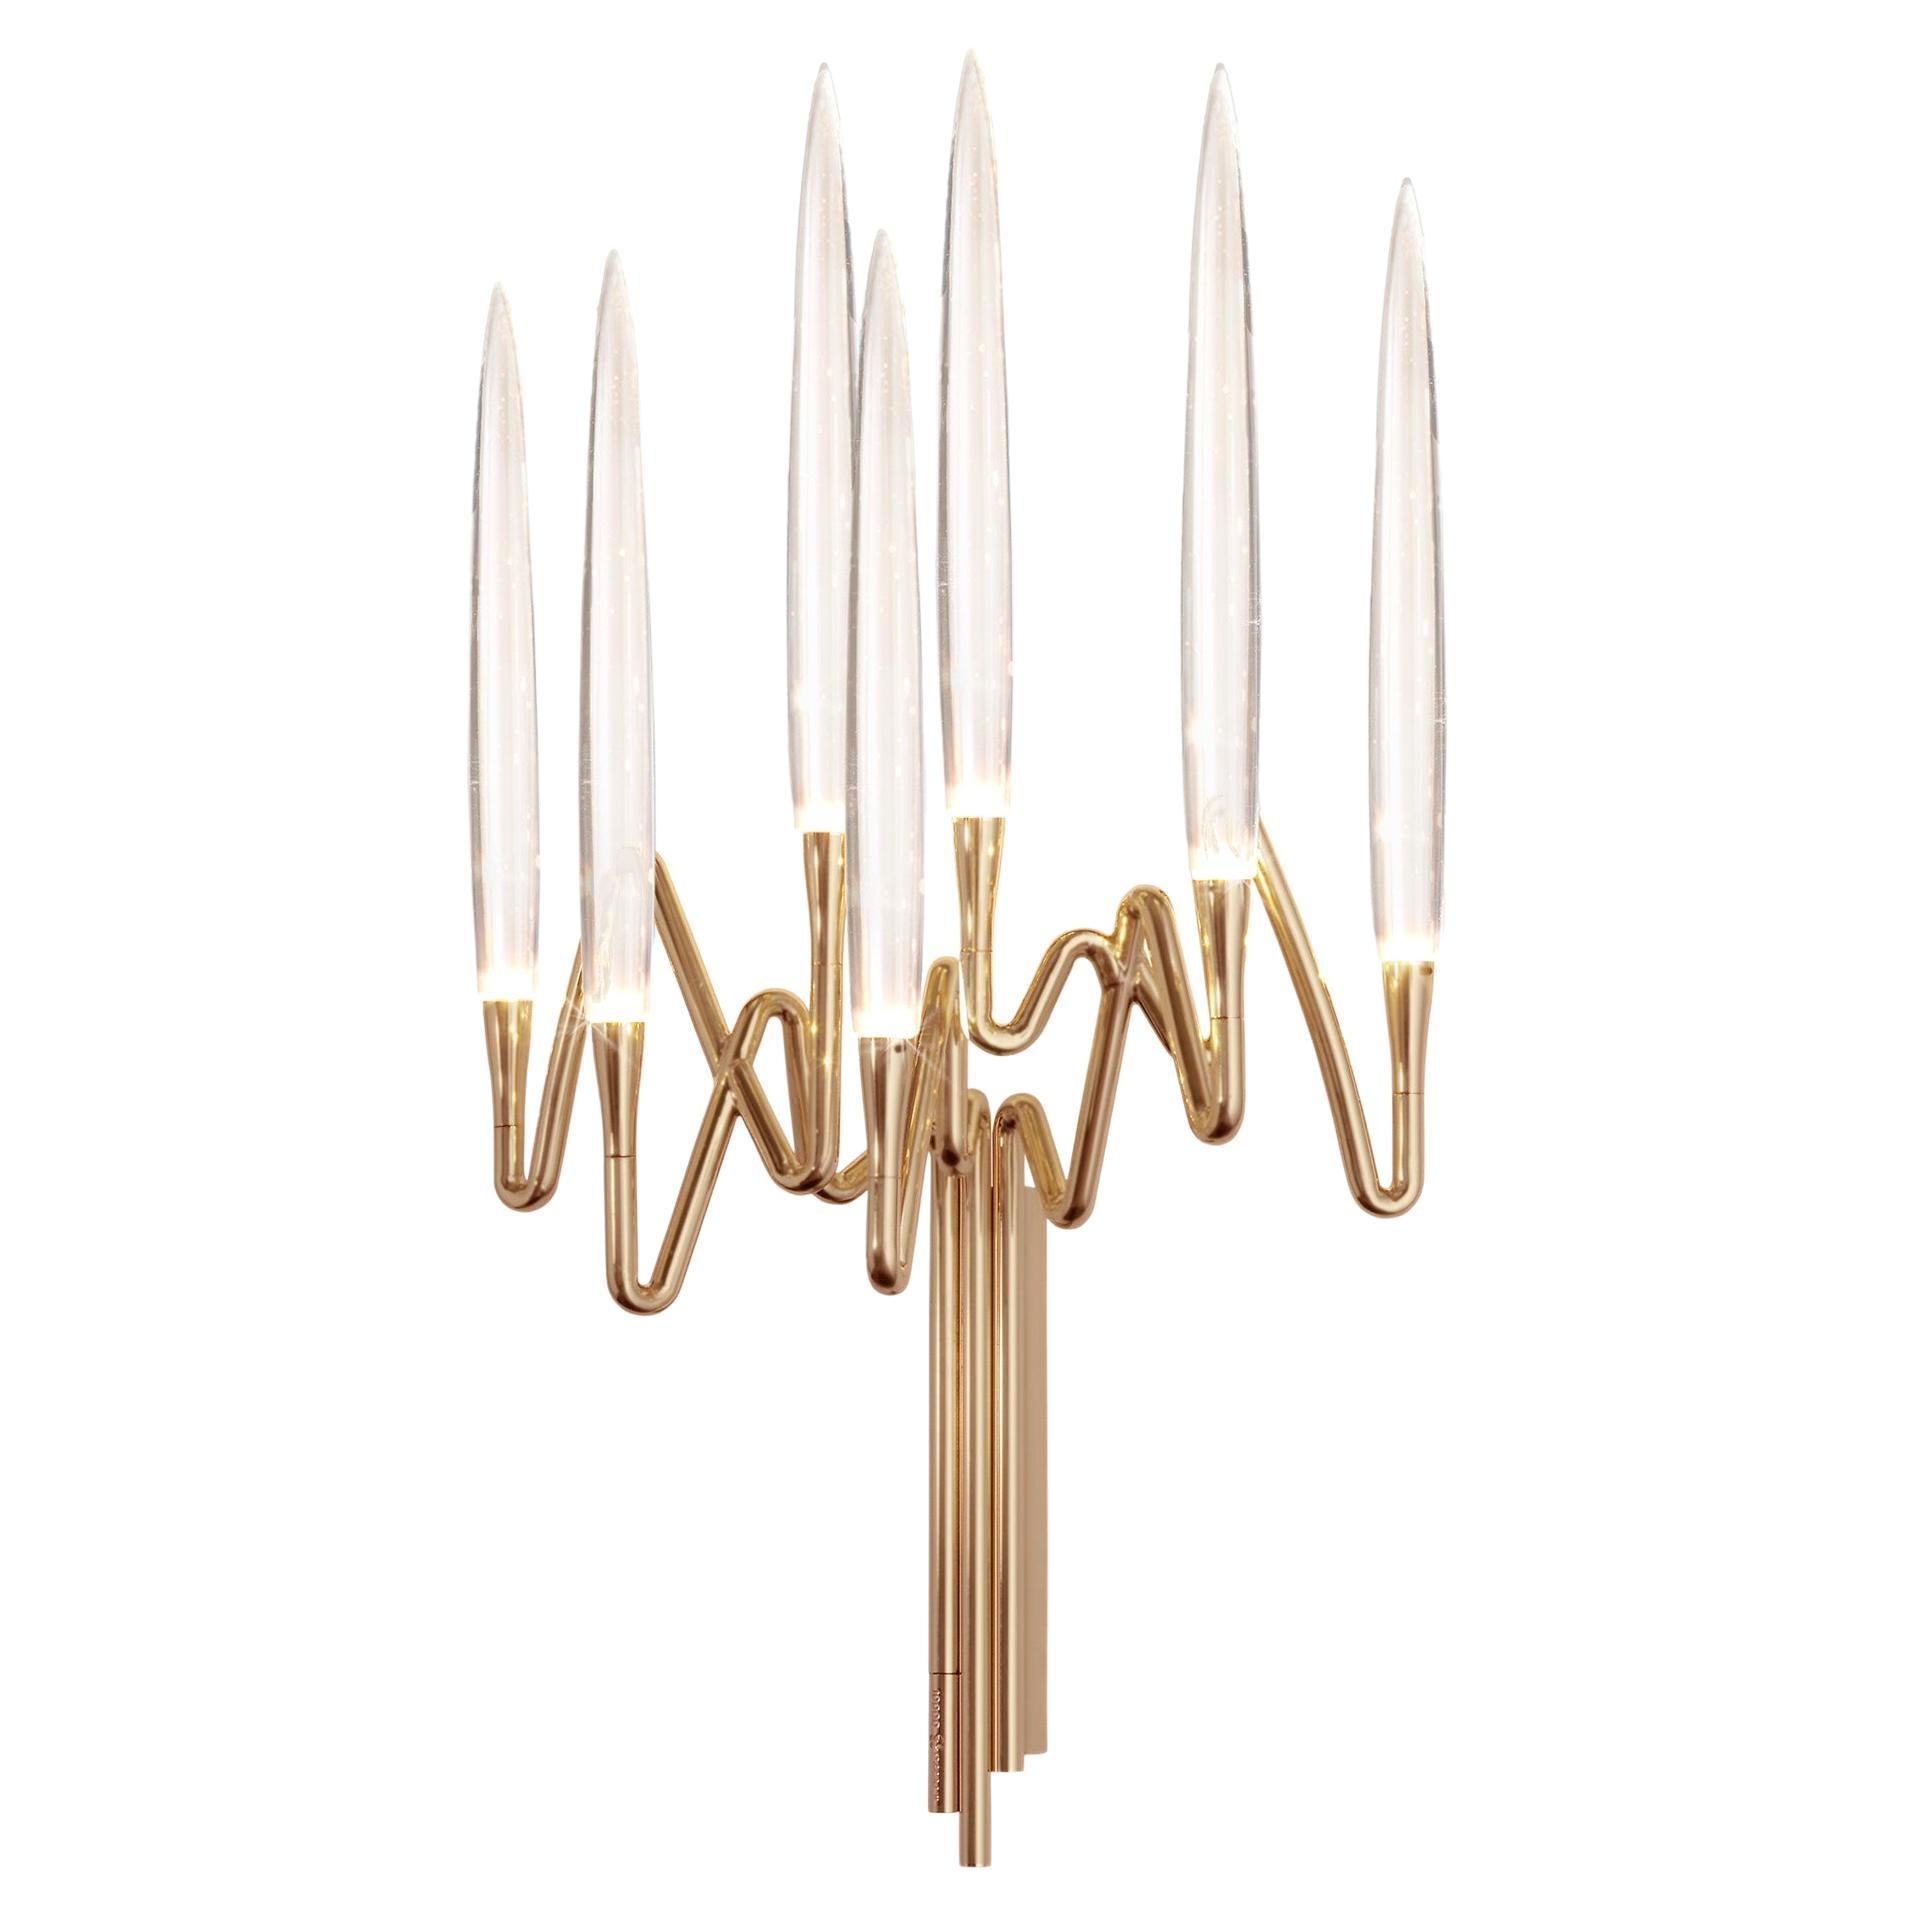 "Il Pezzo 3 Wall Sconce" - width 39cm/15.3" - satin brass - crystal - LEDs For Sale